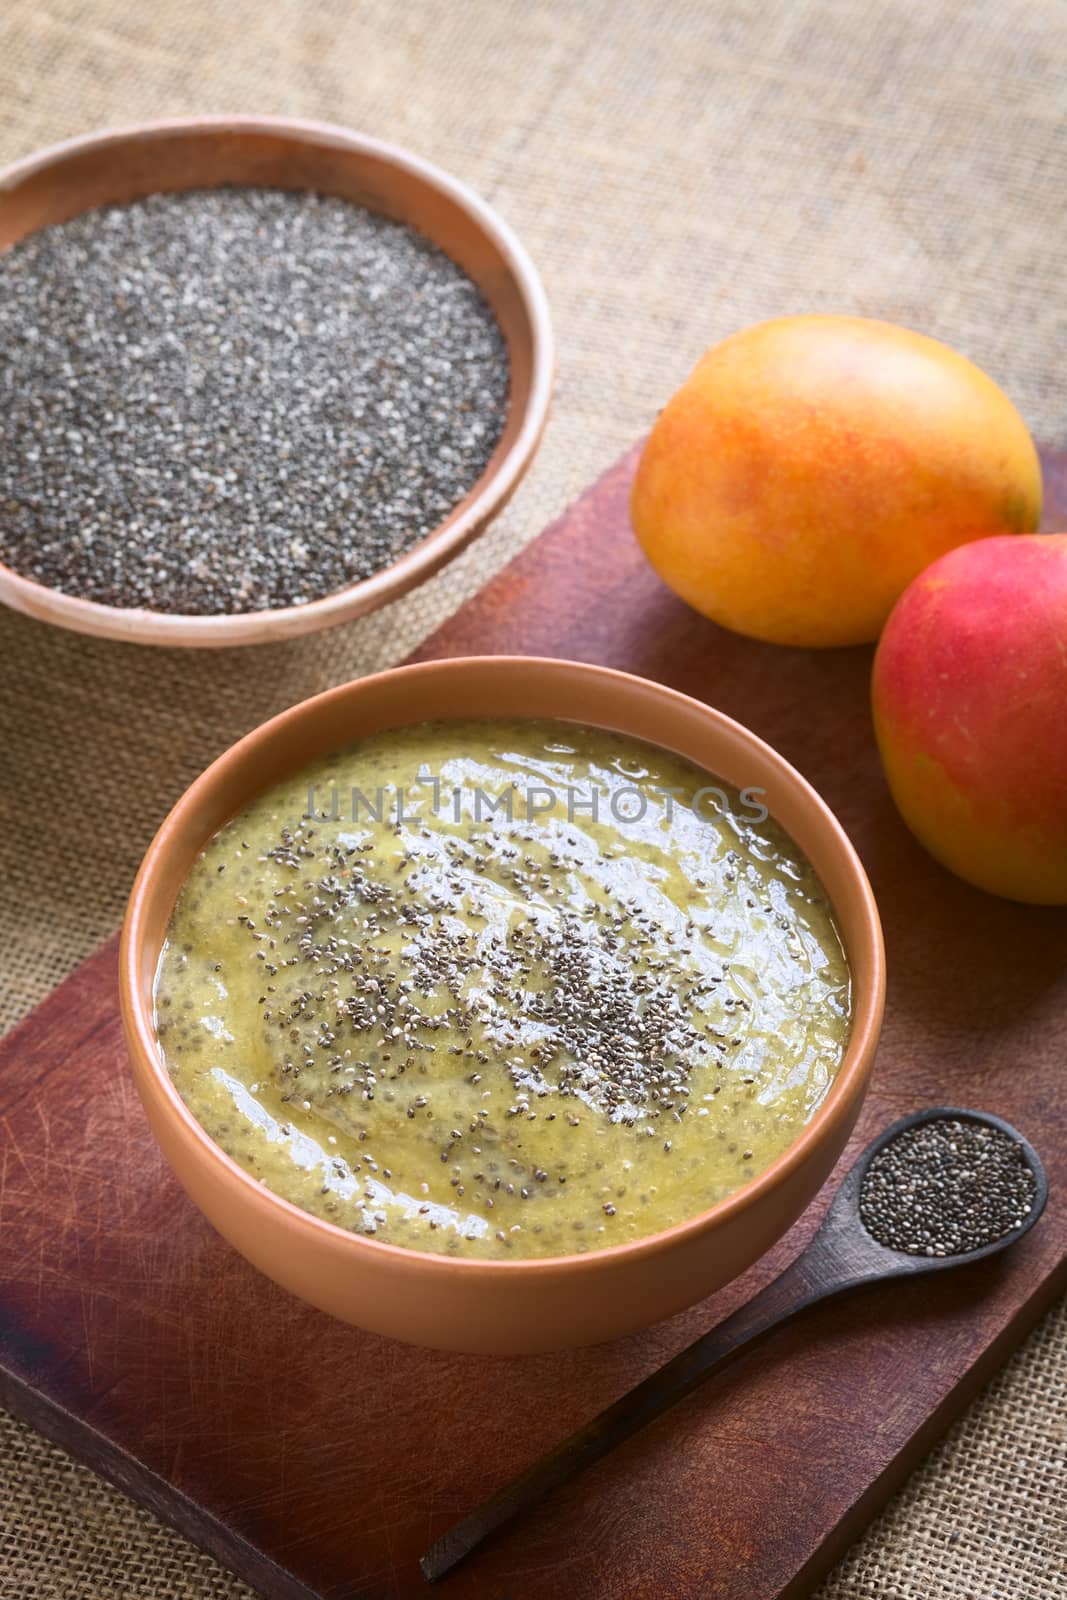 Healthy chia seed (lat. Salvia hispanica) and mango pudding in bowl on wood, photographed with natural light (Selective Focus, Focus in the middle of the pudding)